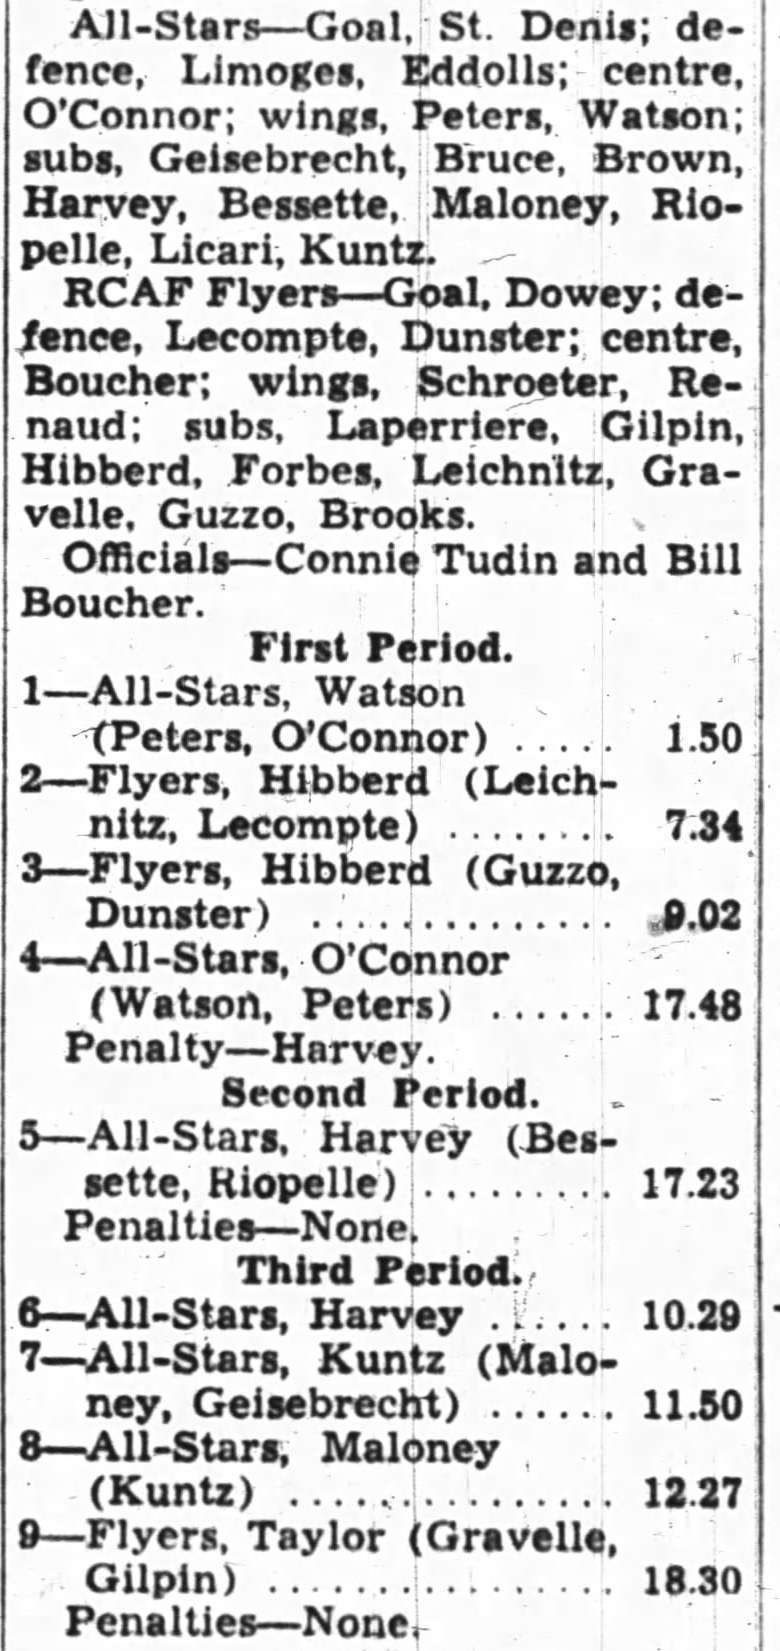 Photo: Lineup and Scoring for  RCAF Flyers vs NHL QSHL All Stars on April 10  1948 Charity hockey  game 